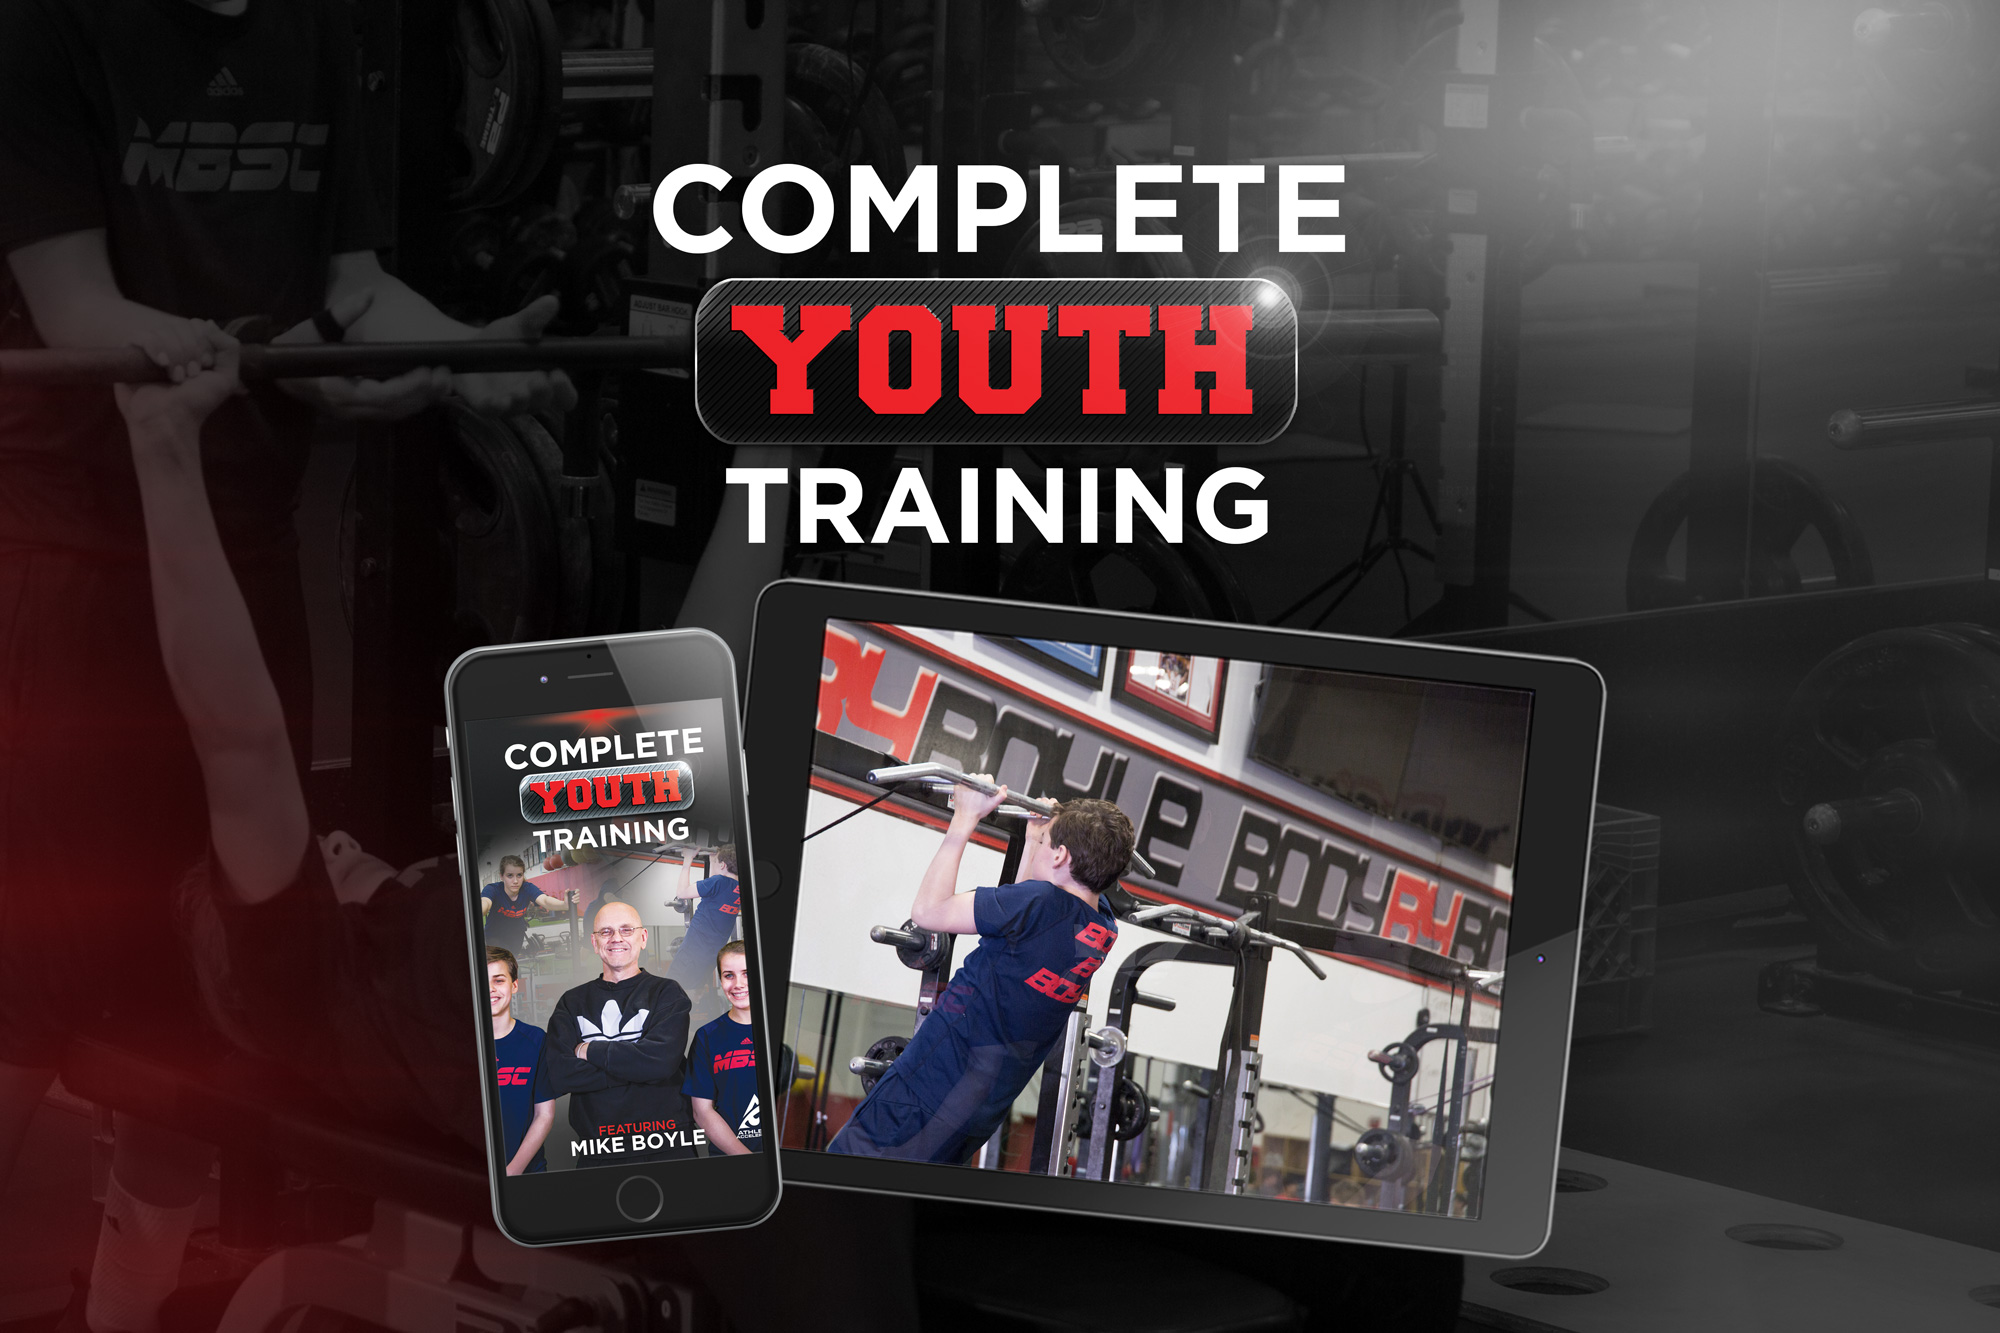 Mike Boyle - Complete Youth Training